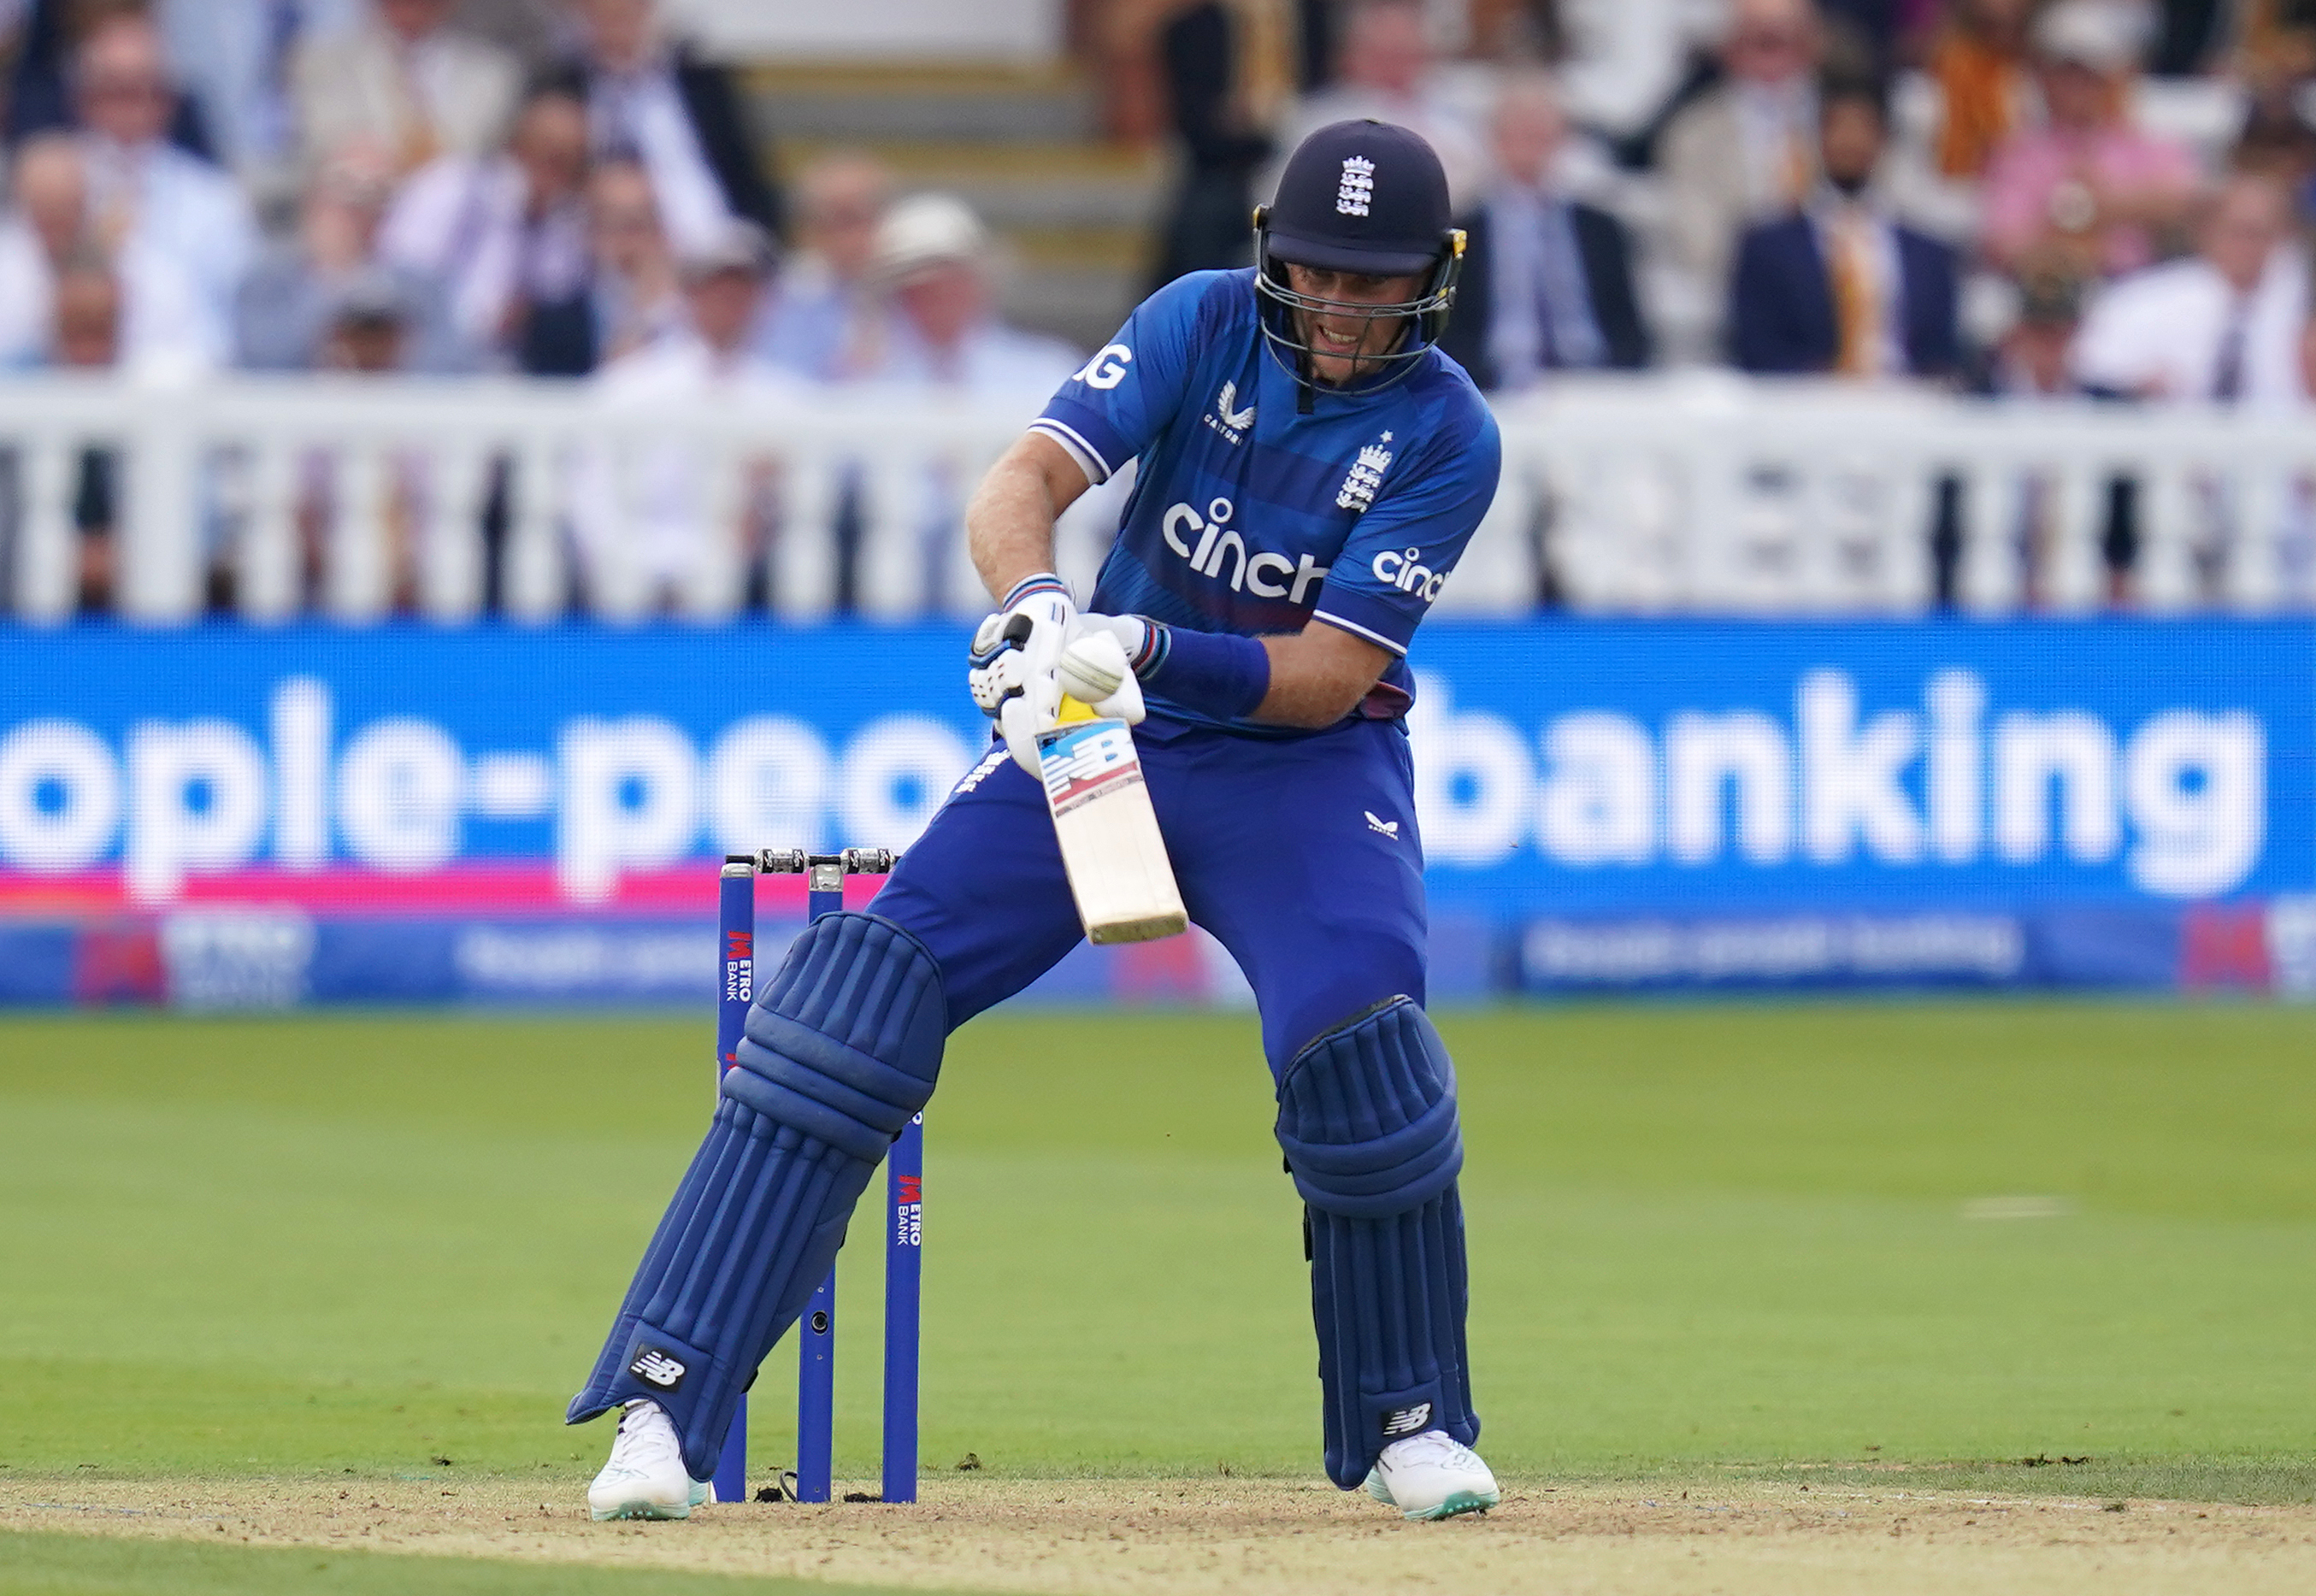 Joe Root asked to play Wednesday's 1st ODI against Ireland.